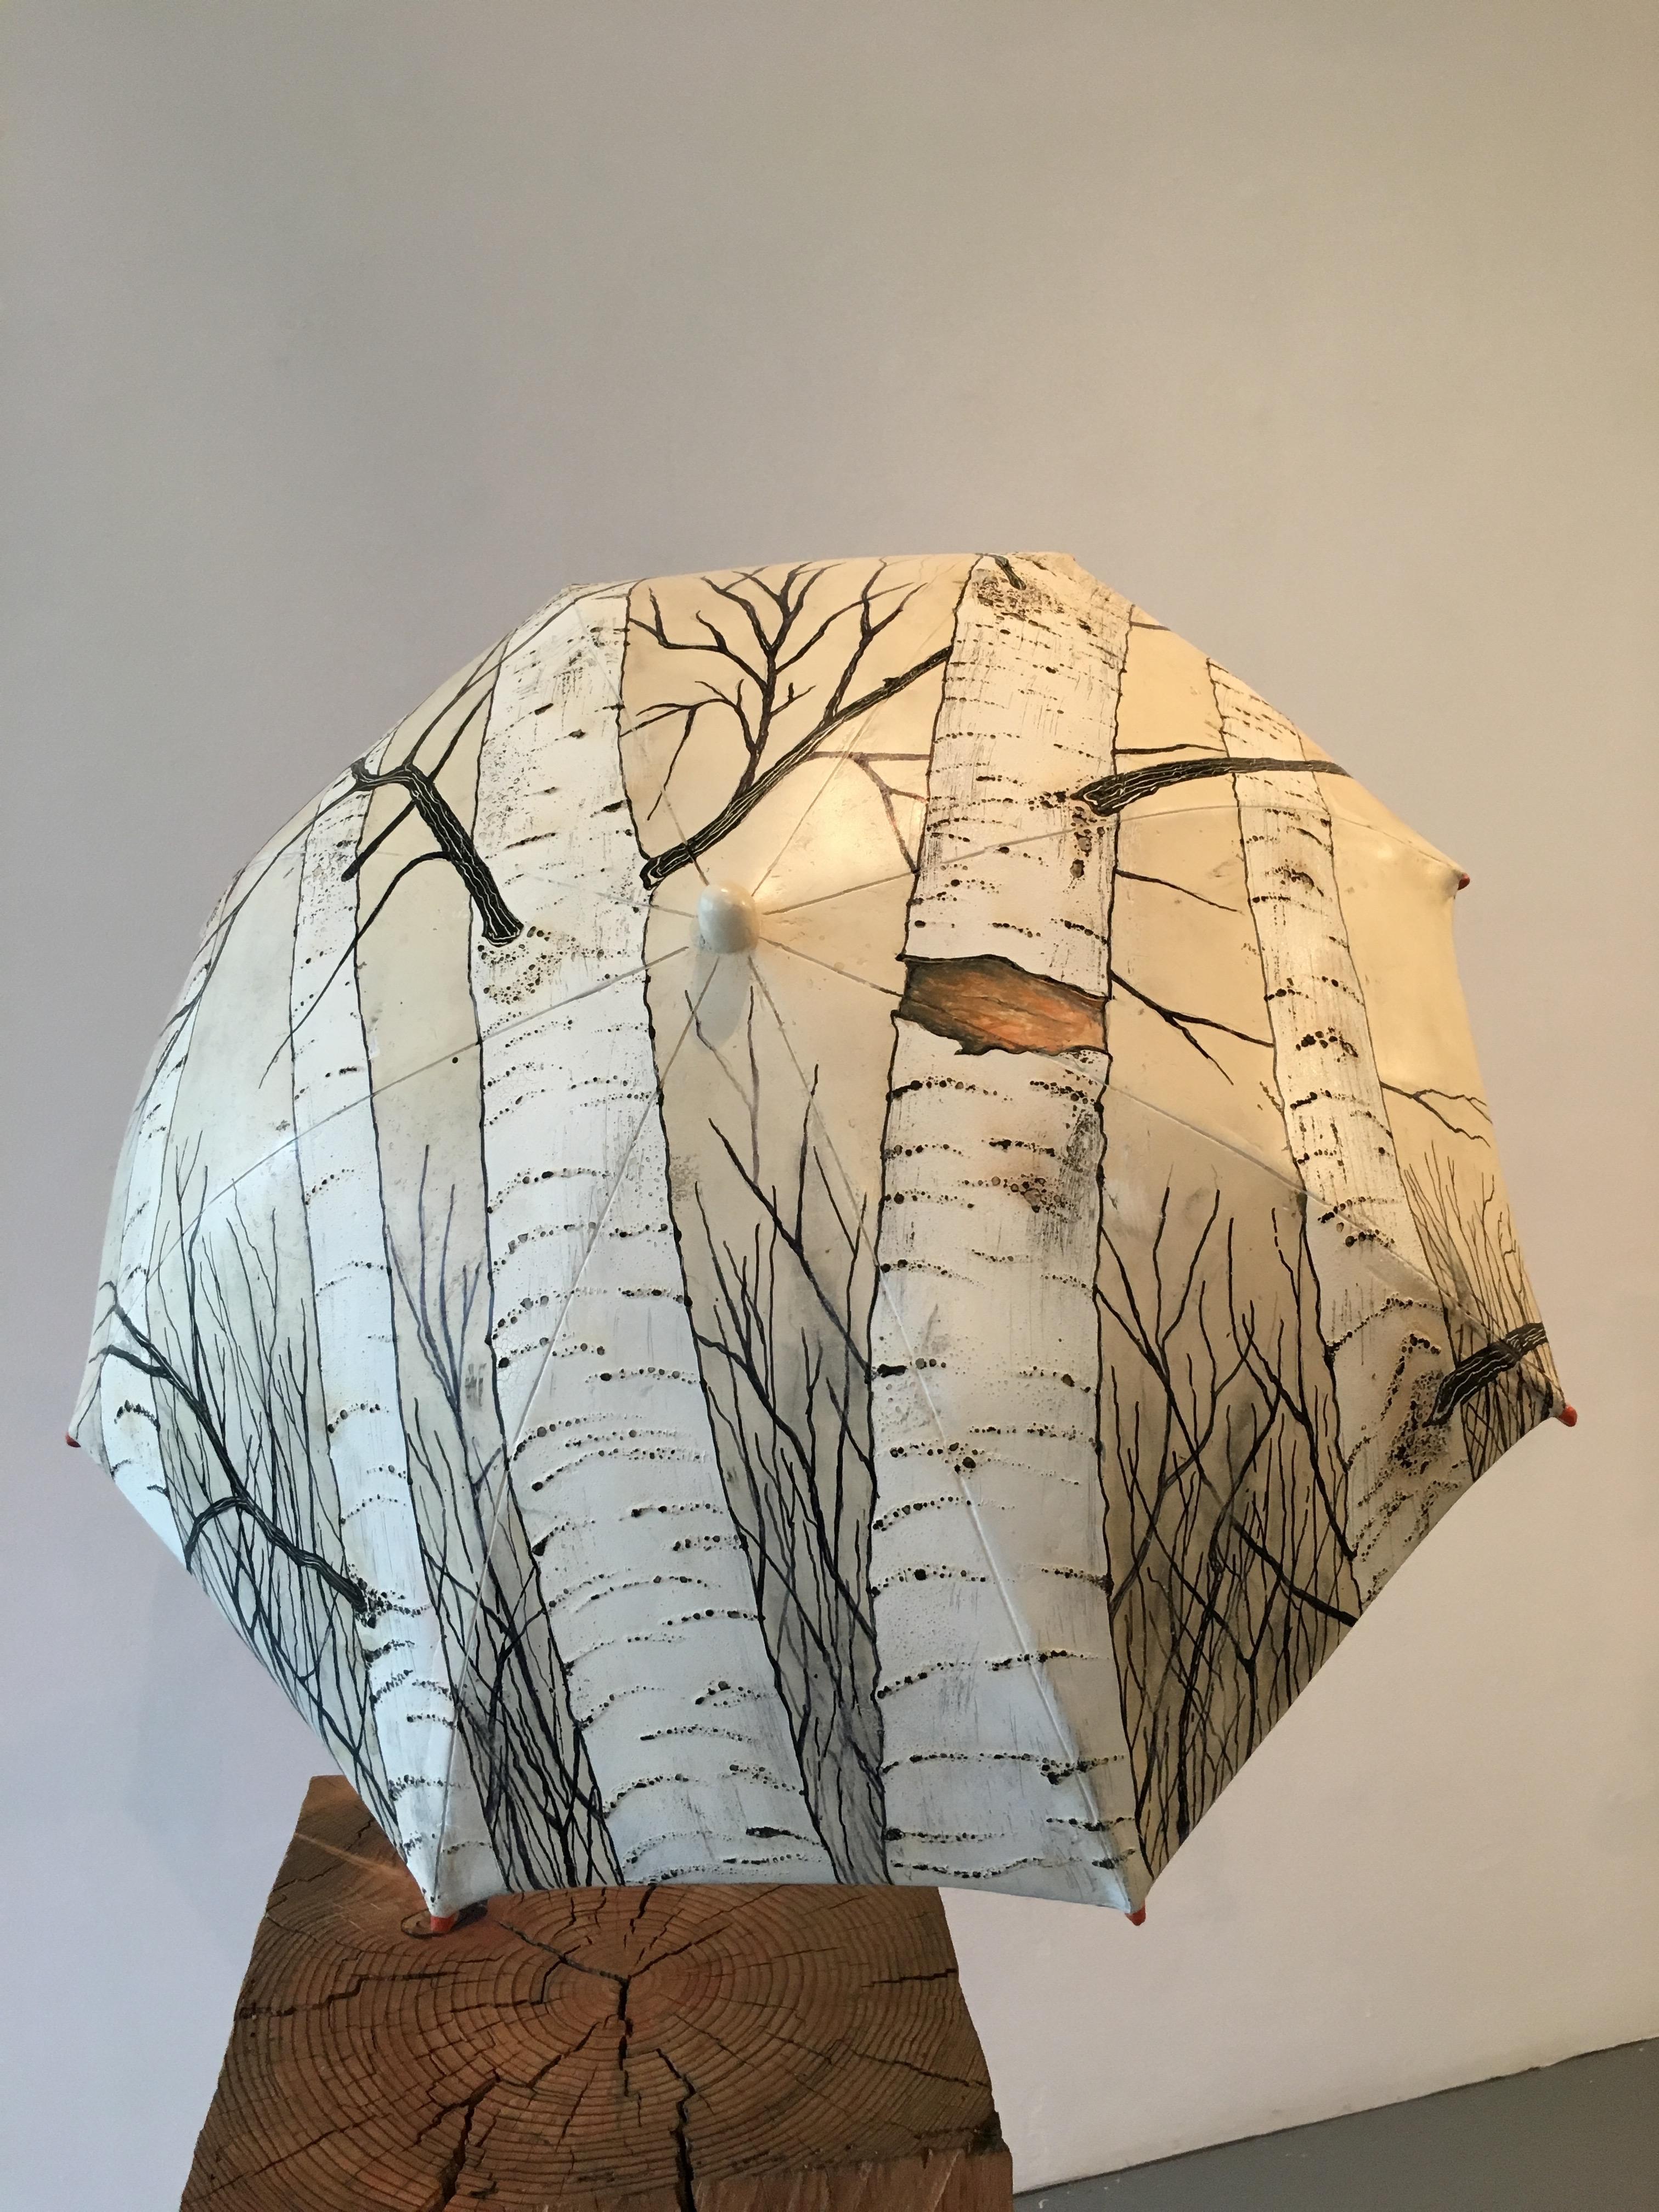 CANOPY - The trees on the  umbrella is a celebration of the beauty of the forest. The handle is a birch branch still alive. The big discarded timber is forever joined in death with the living branch. The log is gripping the umbrella to save the